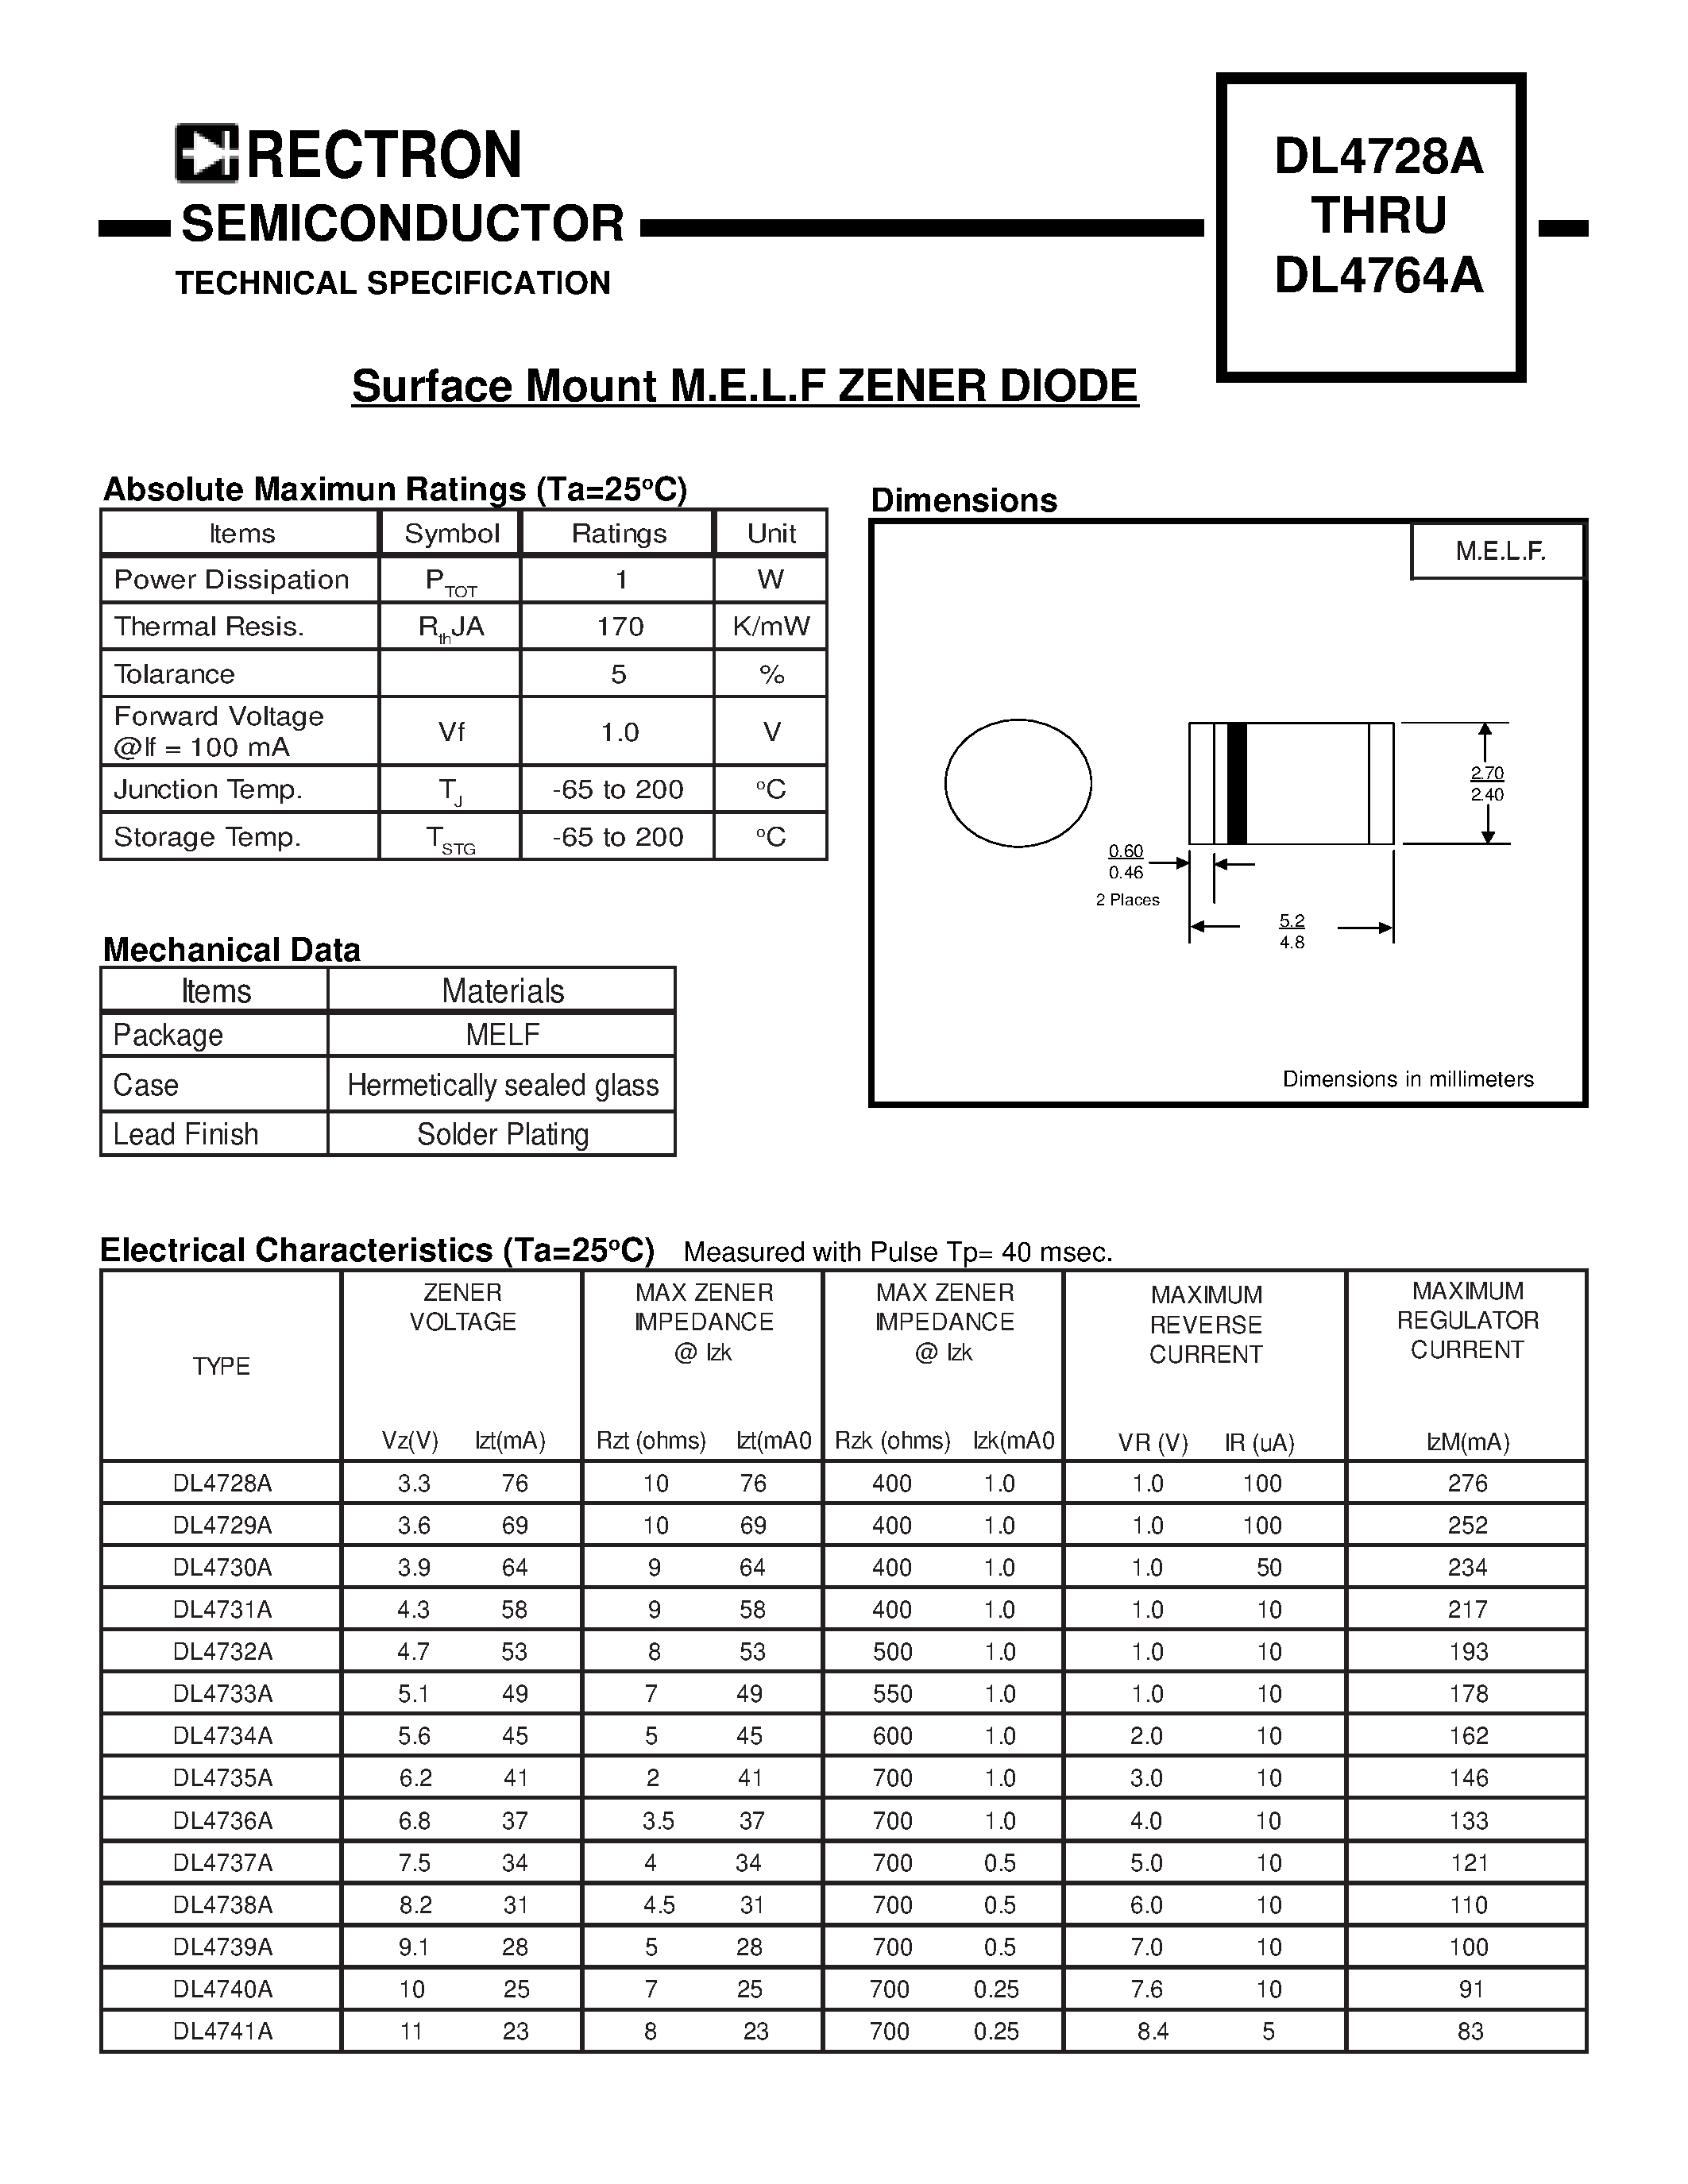 Datasheet DL4757A - Surface Mount M.E.L.F ZENER DIODE page 1